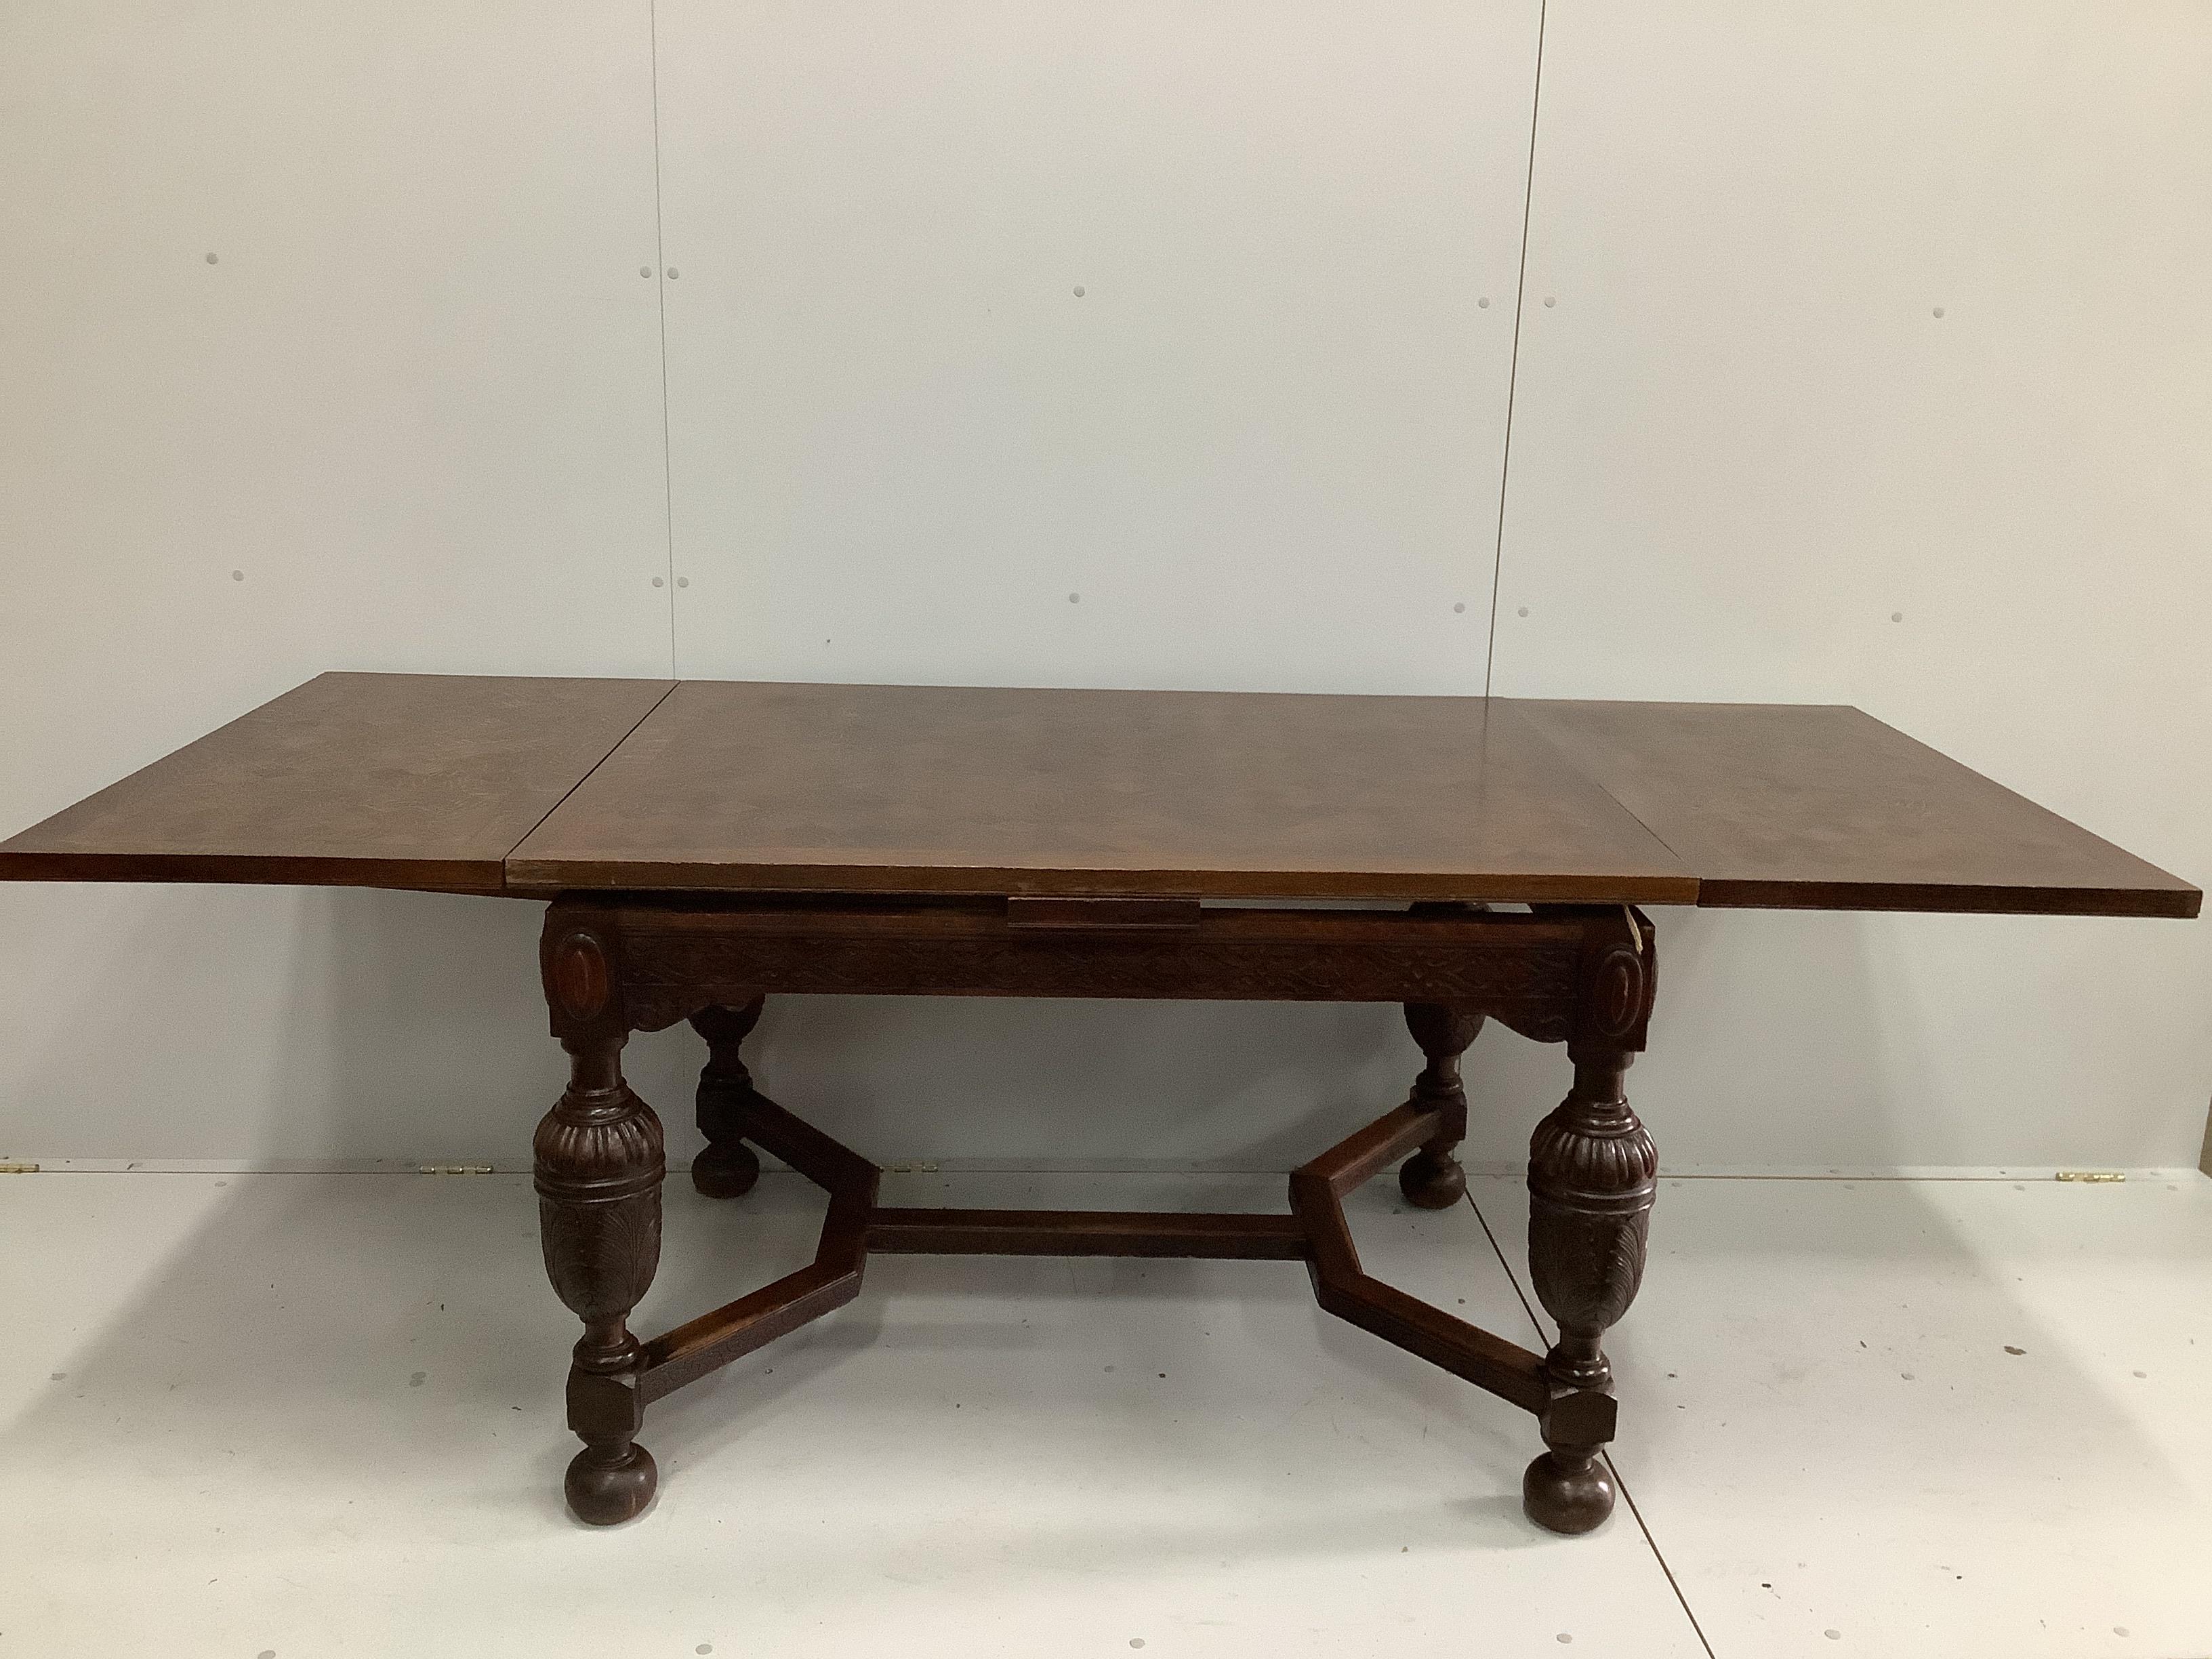 A Jacobean Revival parquetry inlaid rectangular oak draw leaf dining table, 220cm extended, depth 94cm, height 78cm together with six 1920's oak dining chairs, two with arms